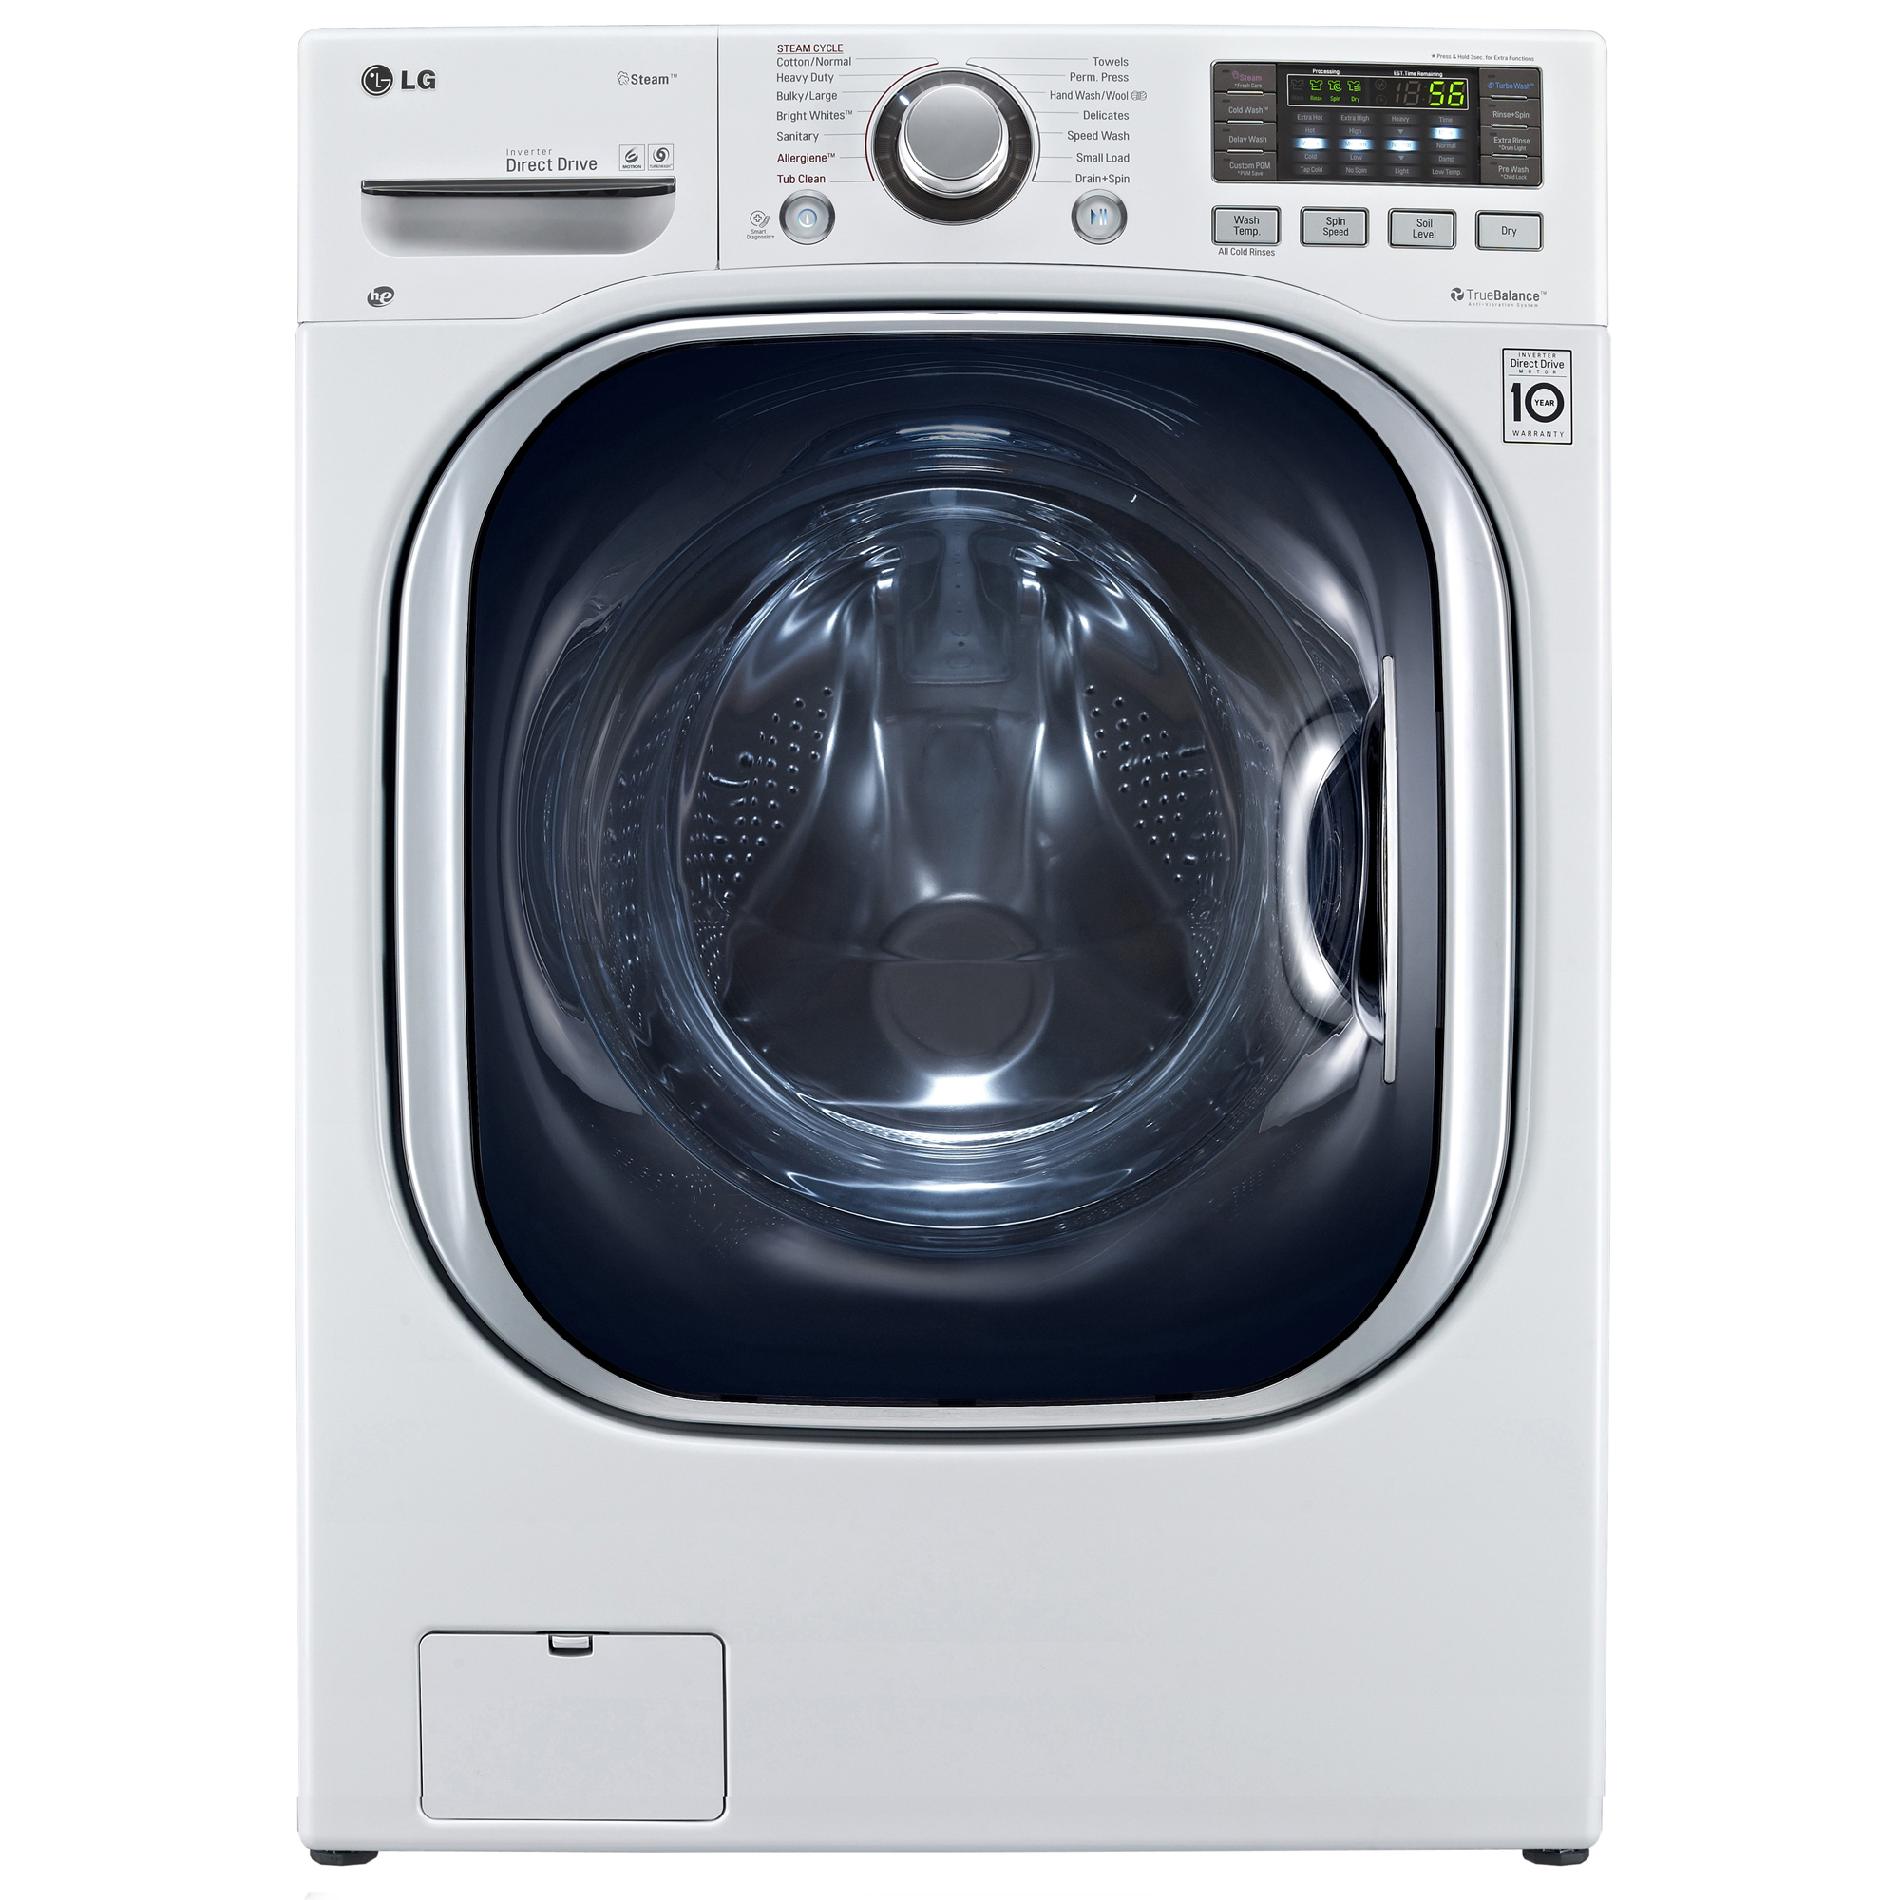 Where can one find LG washer parts at a discounted price?